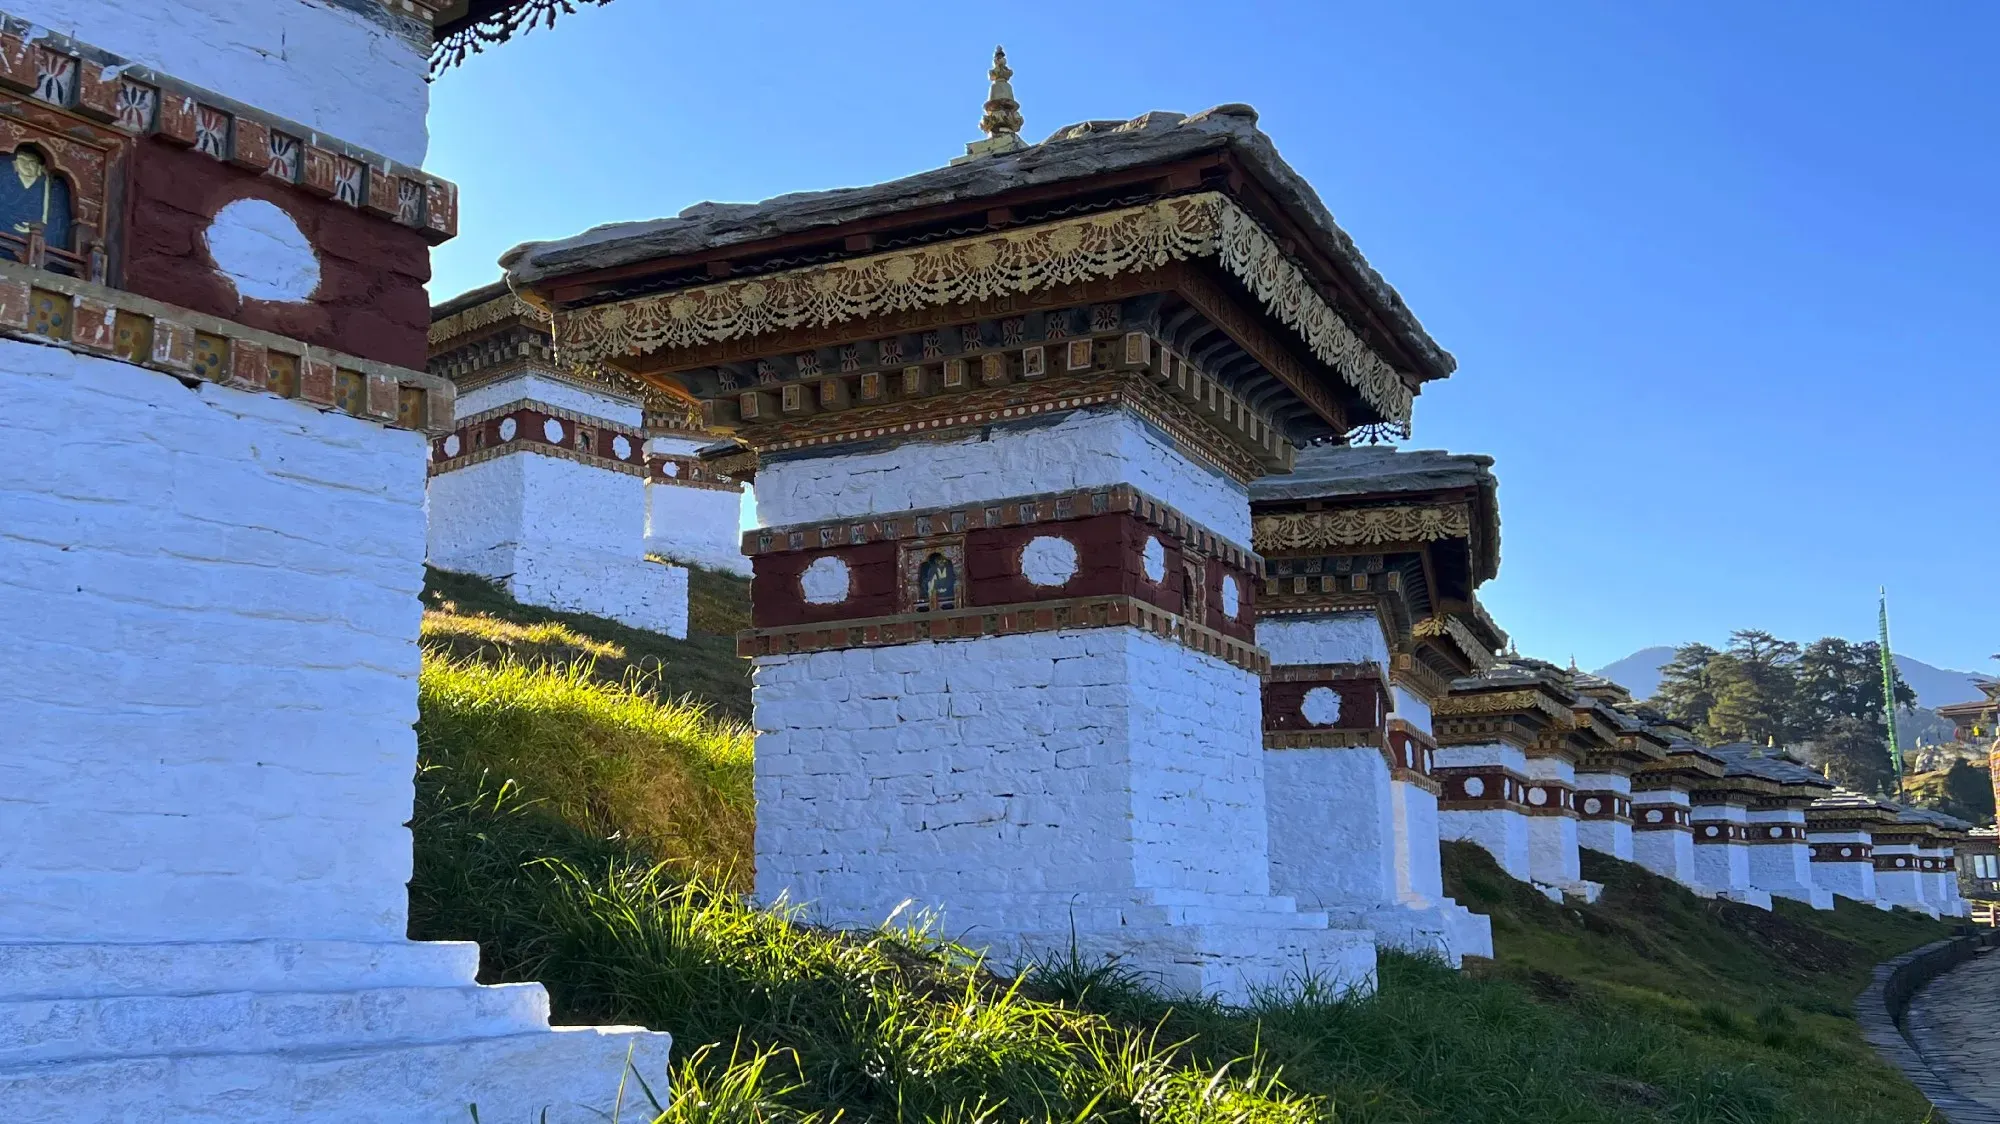 A series of white painted stupas